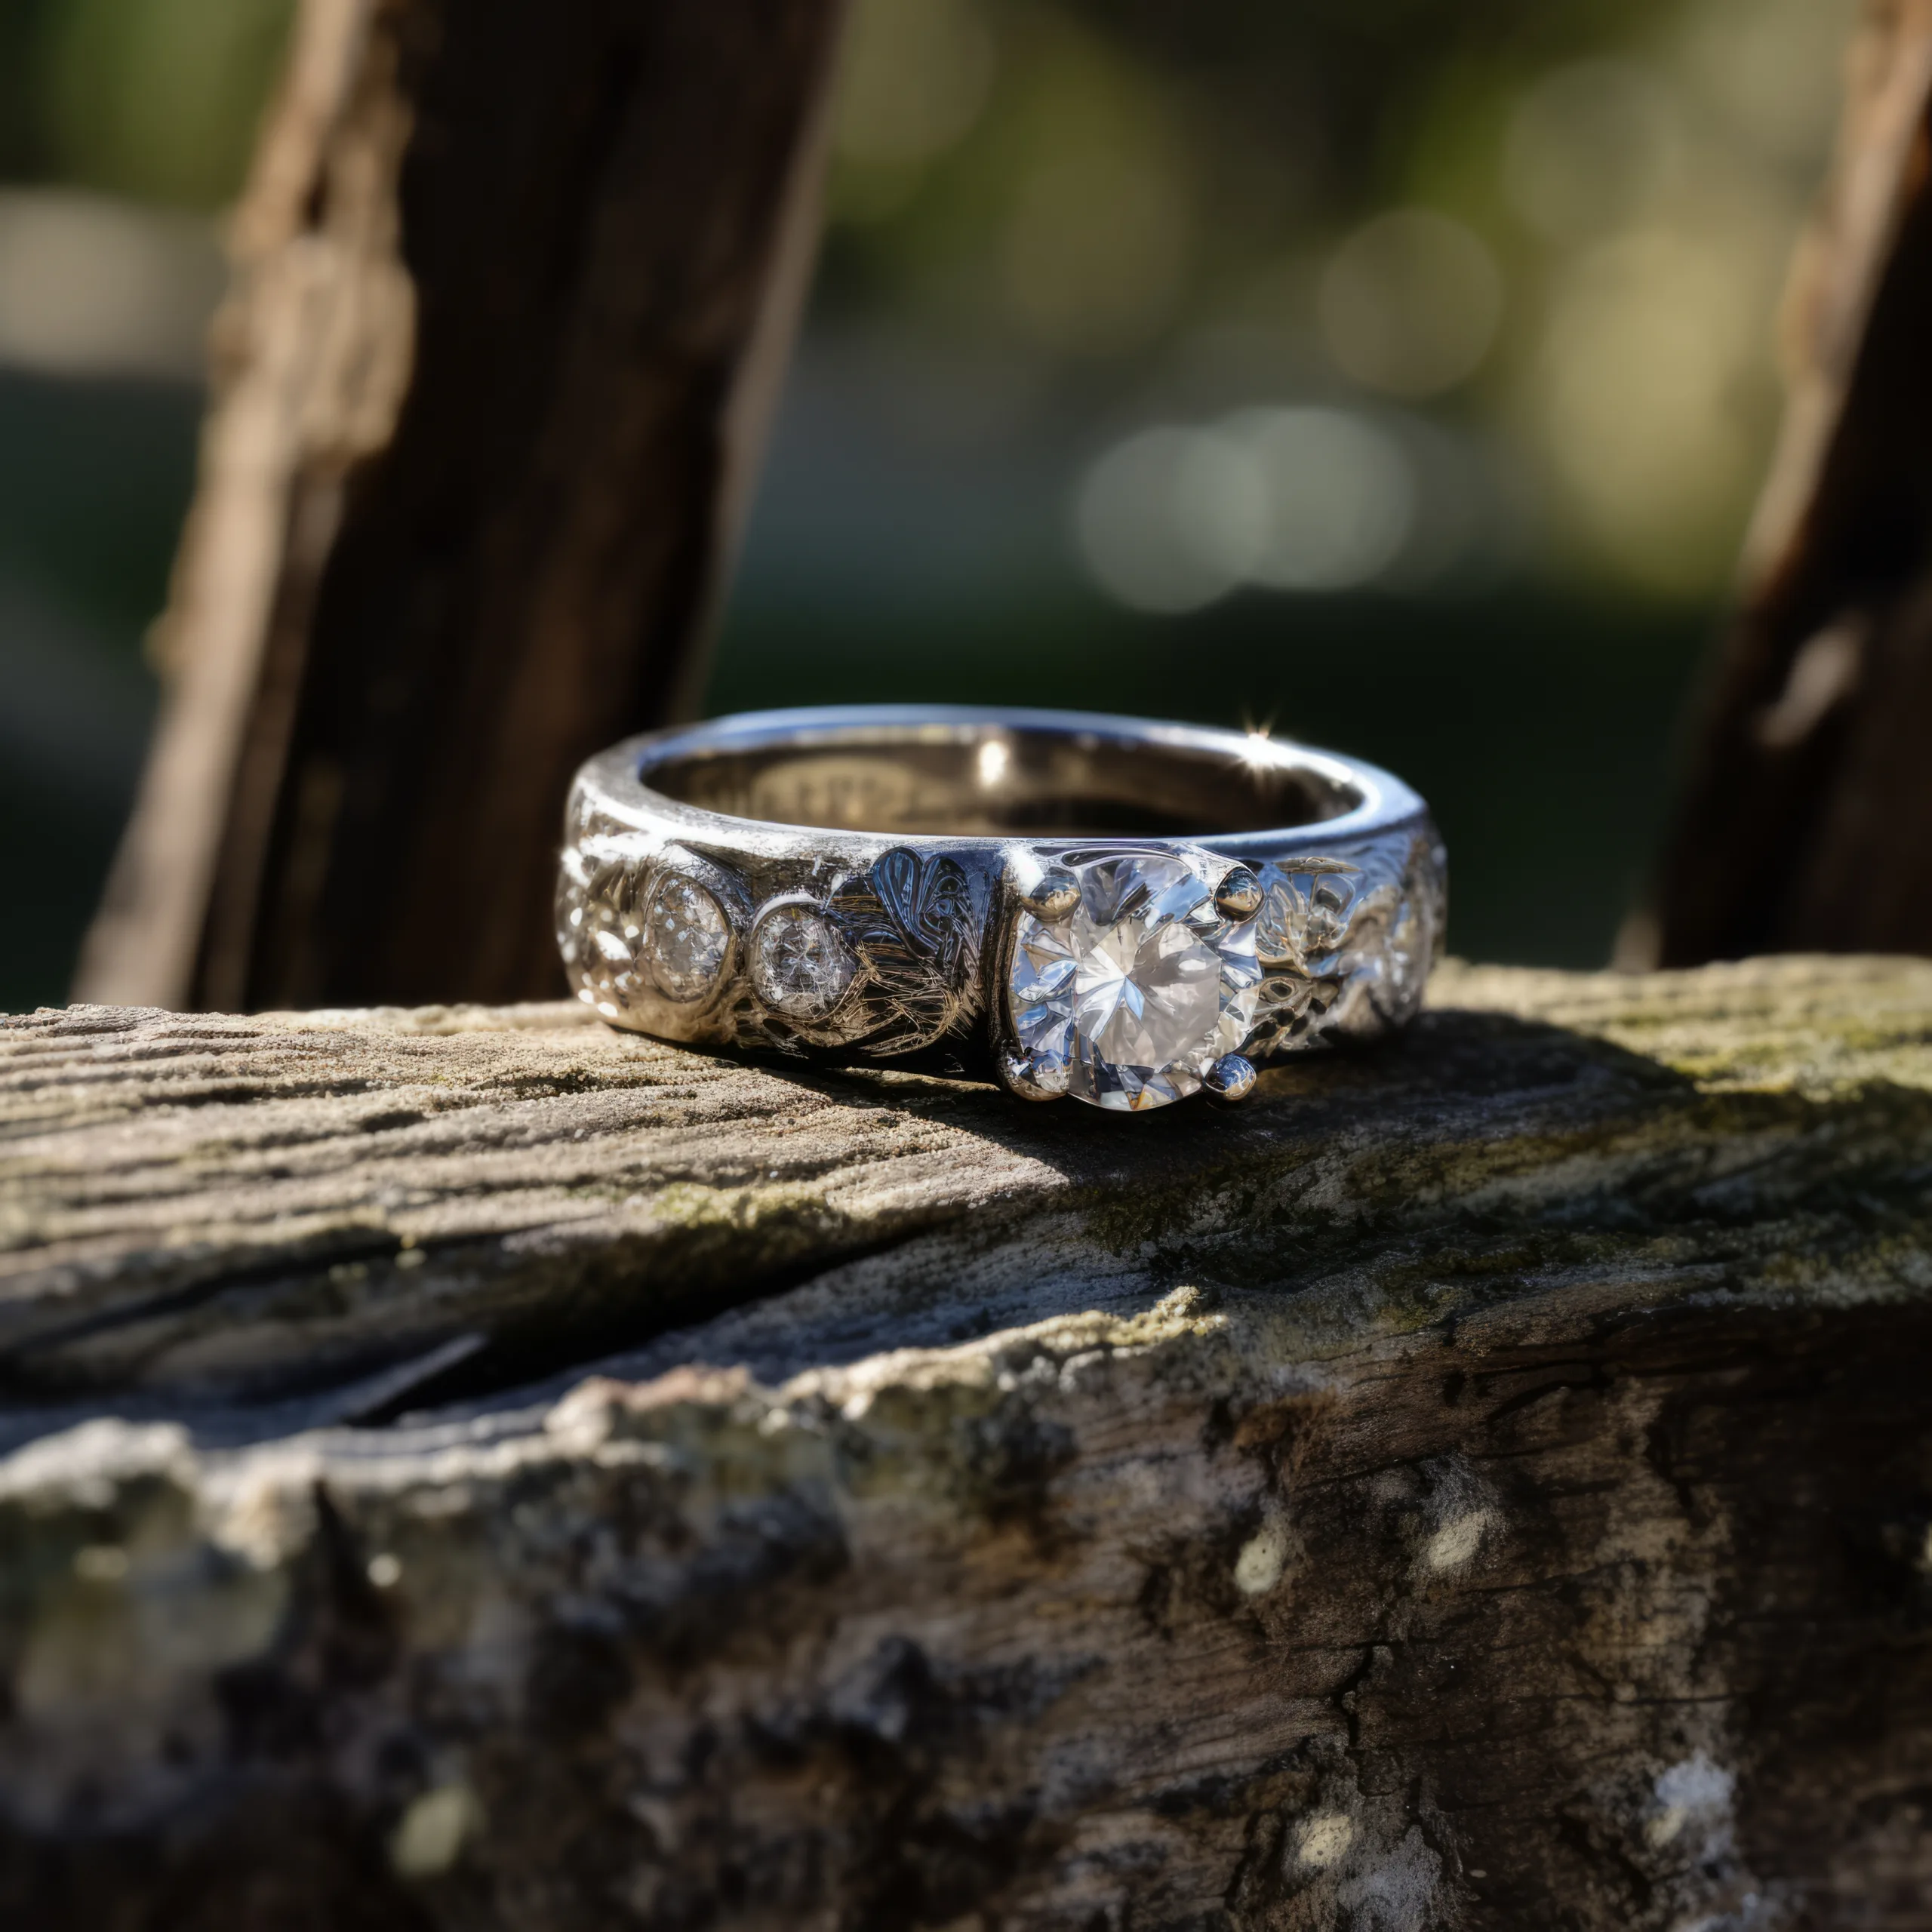 Orchadleigh House Wedding Photographer: close up of a wedding ring on a piece of wood.